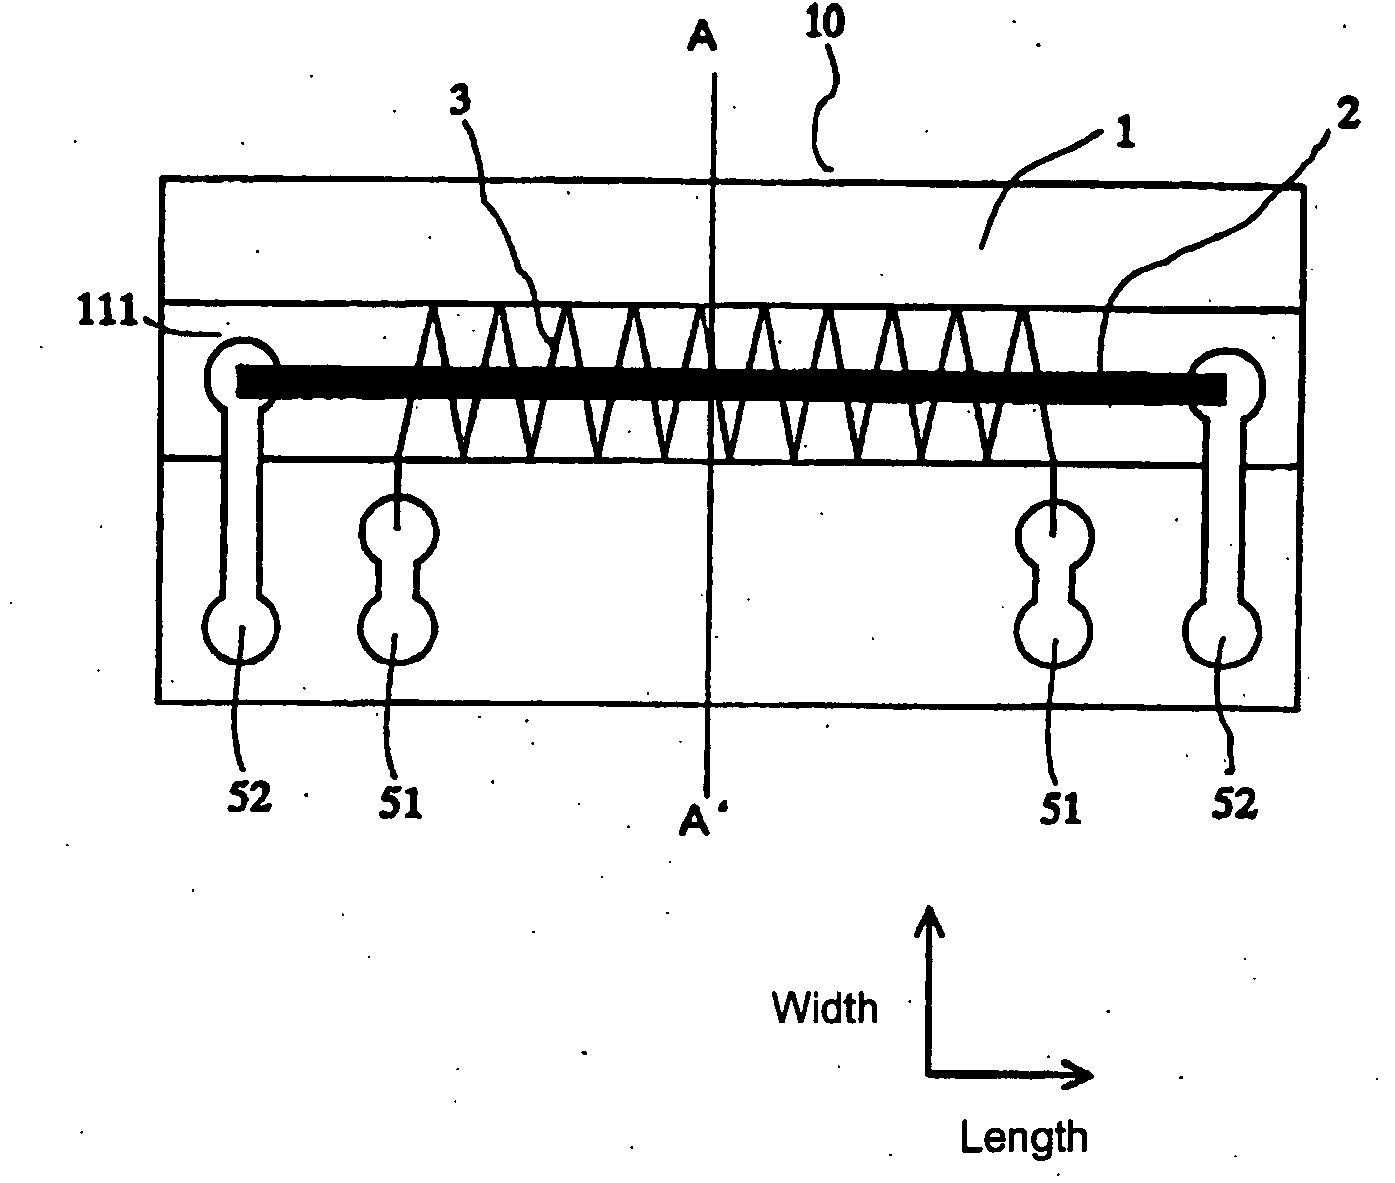 Magnet with electromagnetic coil/impedance/sensor element